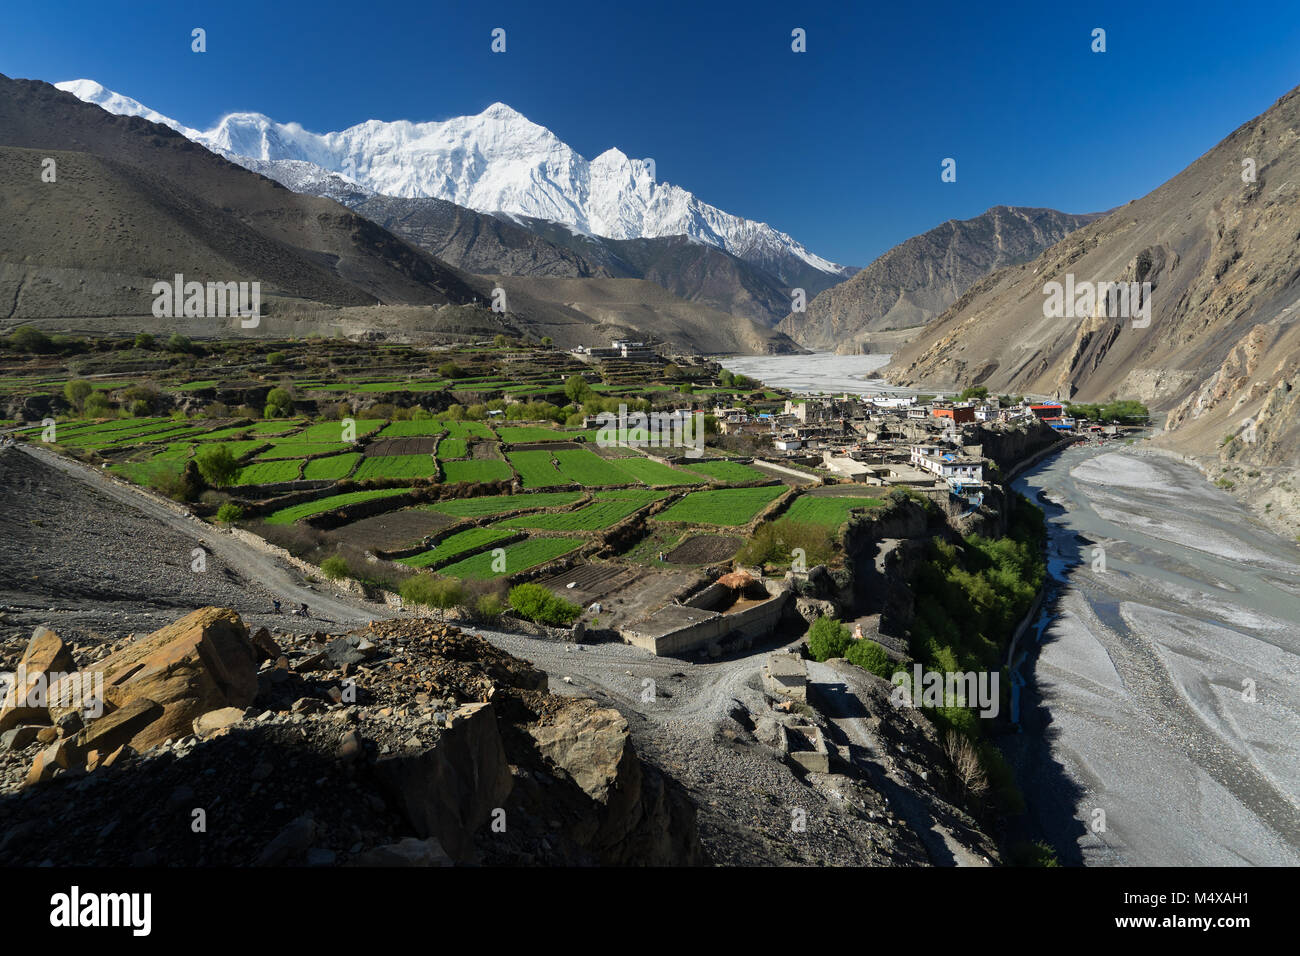 Mesmerizing view of the town of Kabeni and Nilgiri north, Upper Mustang region, Nepal. Stock Photo